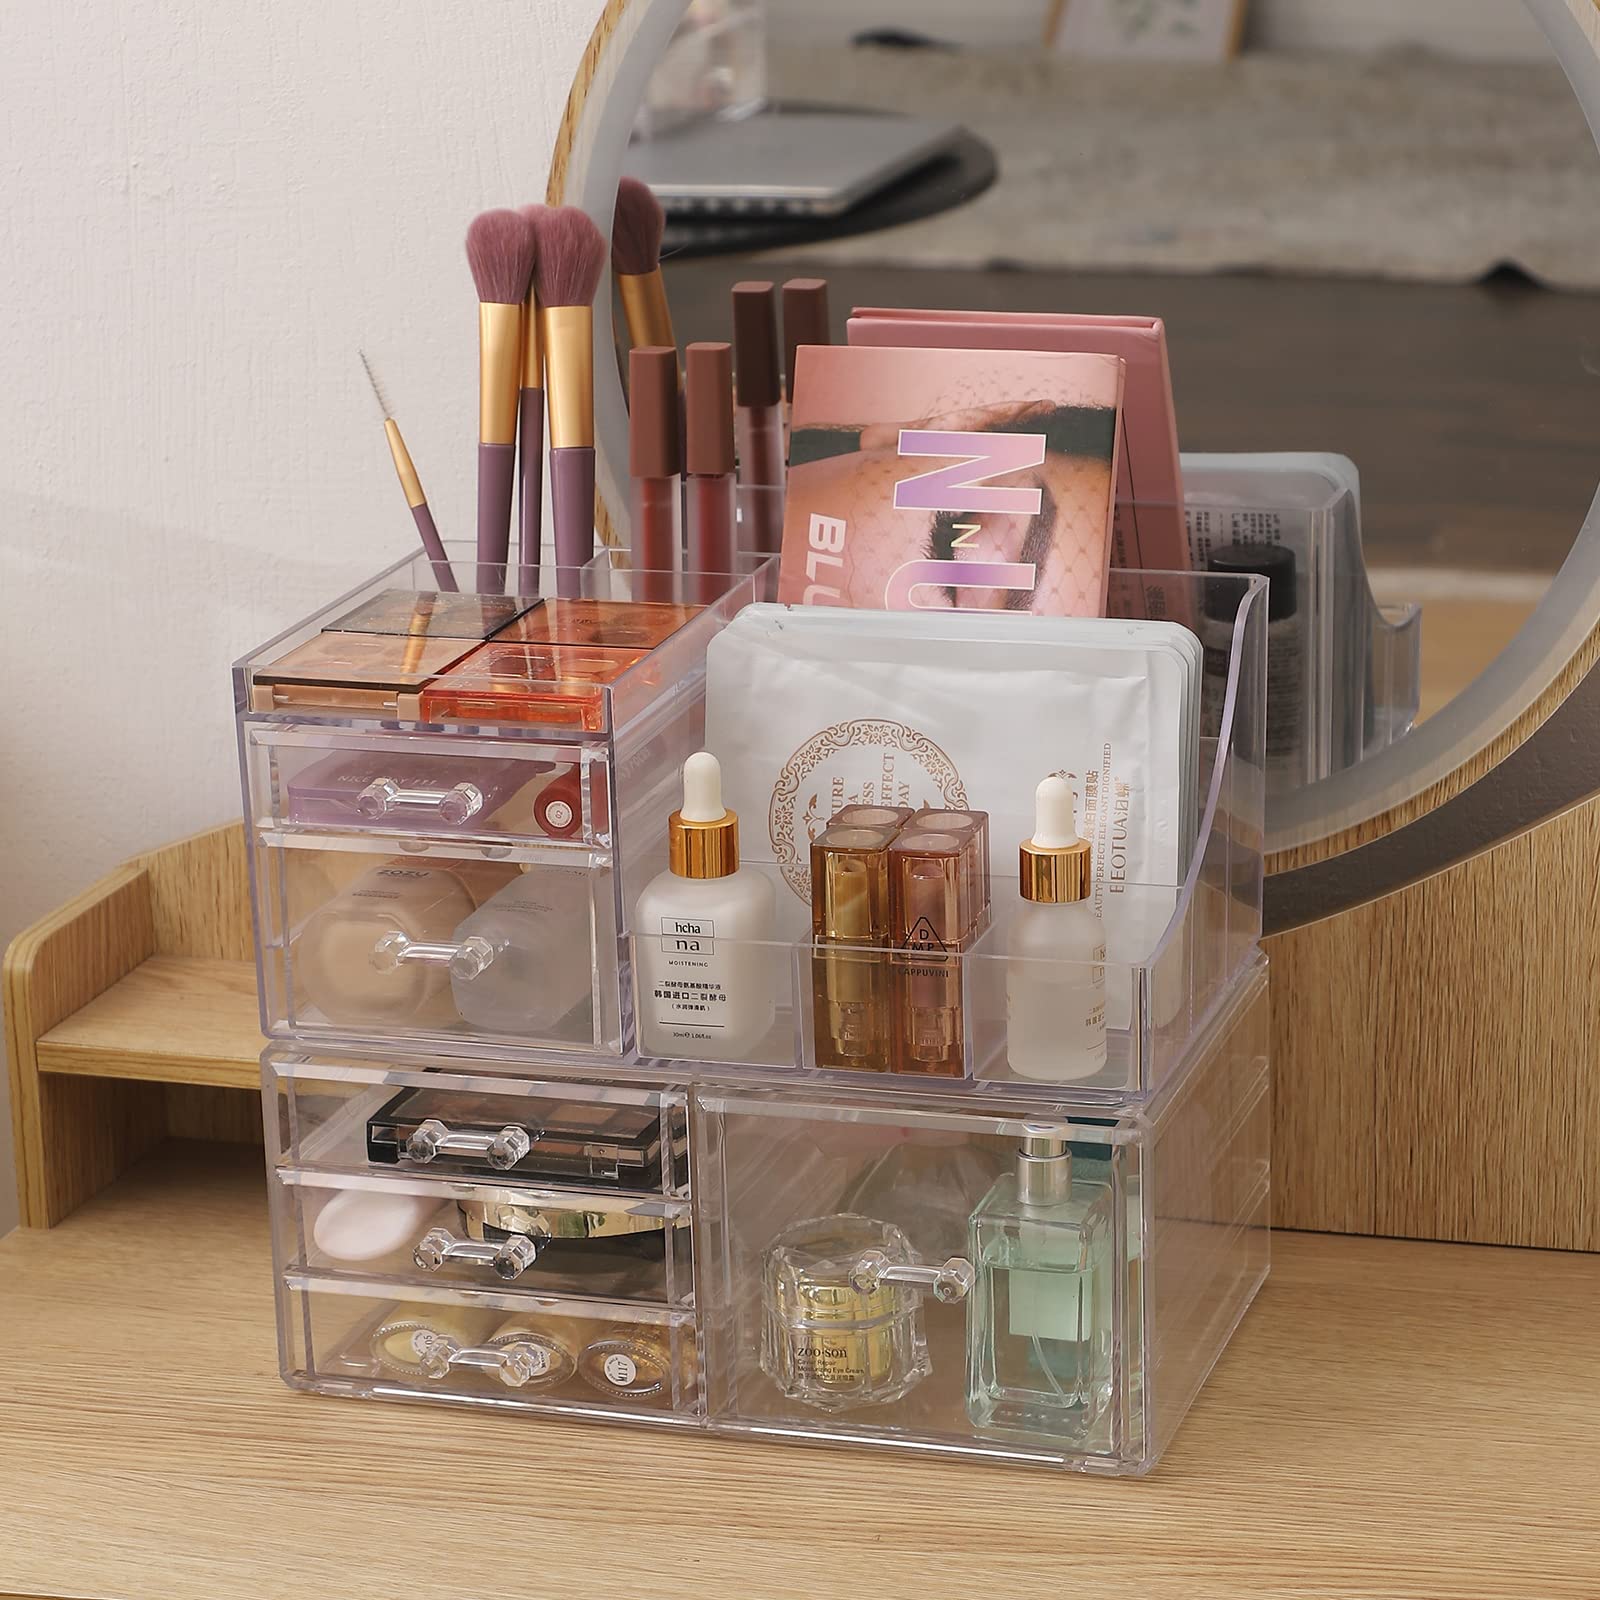 Clear Makeup Organizer and Storage For Vanity,Large Acrylic Cosmetics Display Cases with Stackable Drawers For Bathroom Counter Dresser Brushes Lipsticks Skin Care Beauty Skincare Product Organizing